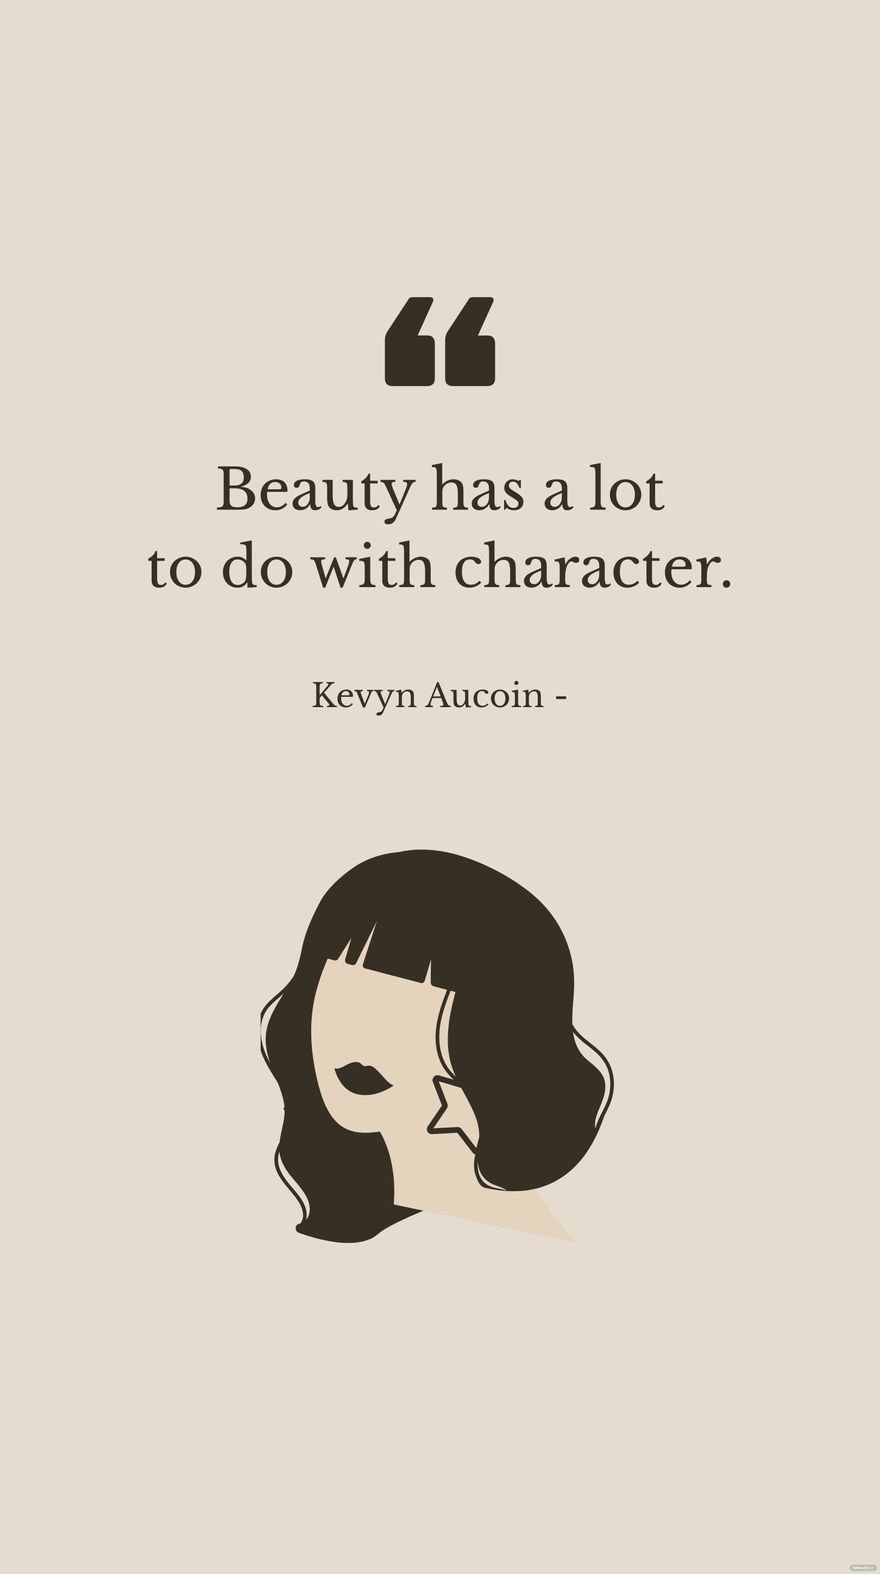 Free Kevyn Aucoin - Beauty has a lot to do with character.